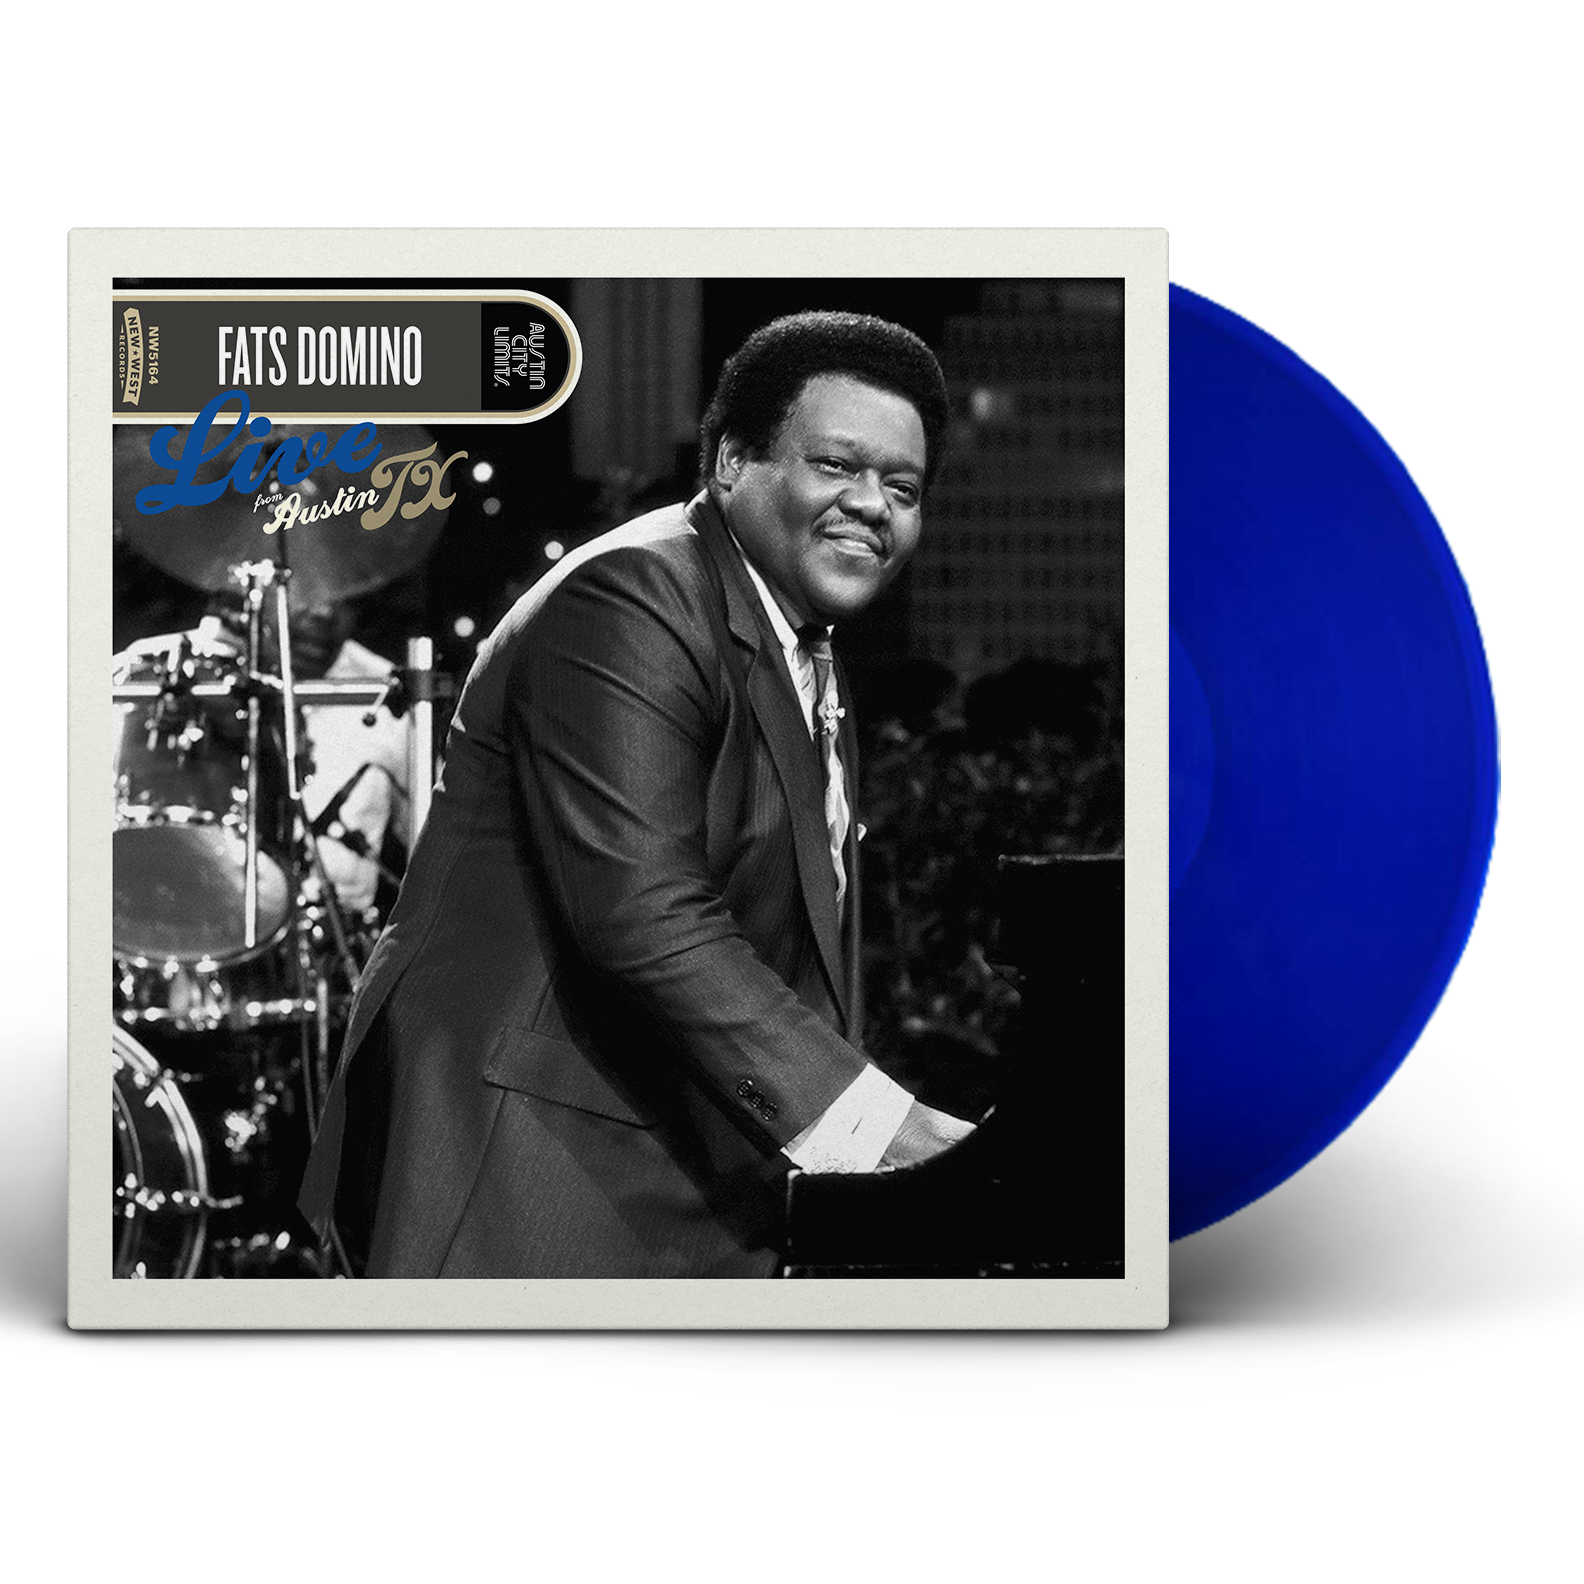 Fats Domino - Live From Austin, TX [Limited Edition Color Vinyl]